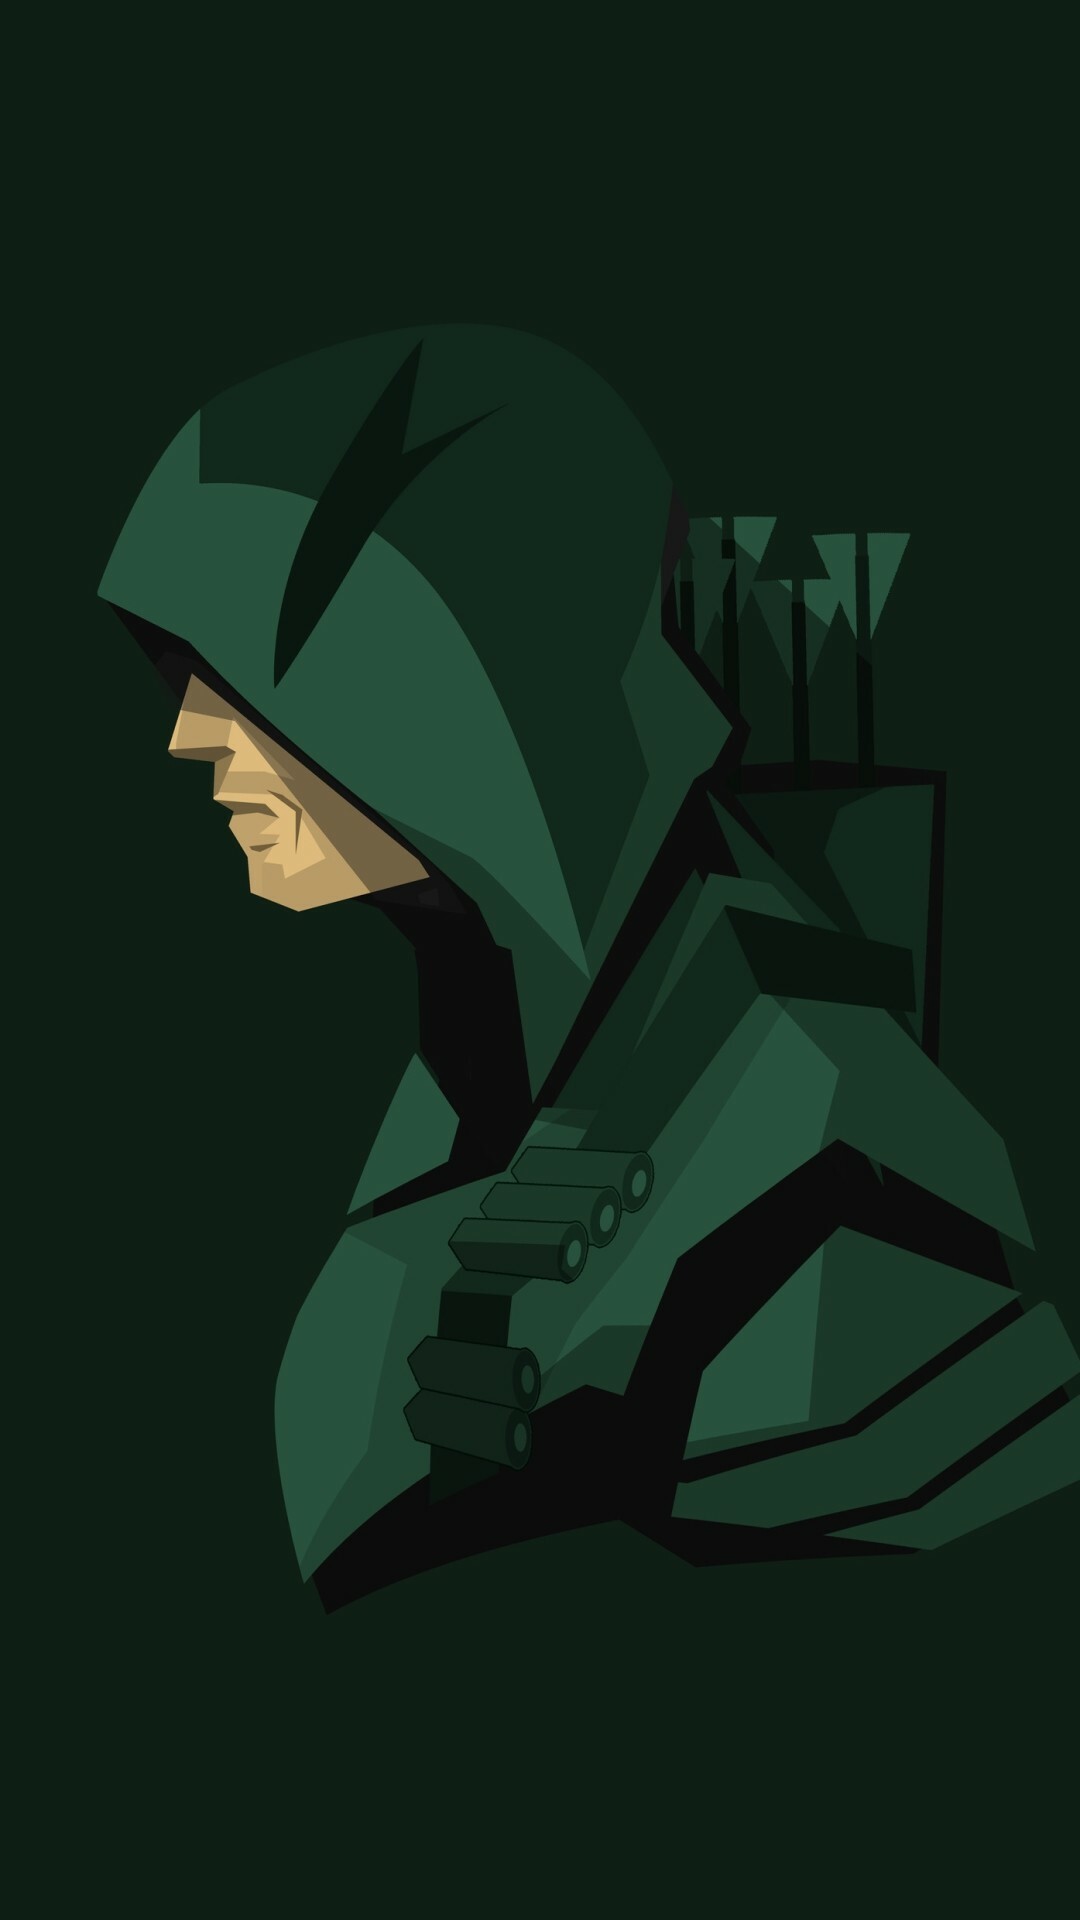 Green Arrow: One of DC's most iconic heroes, Originally introduced as a Robin Hood influenced superhero. 1080x1920 Full HD Wallpaper.